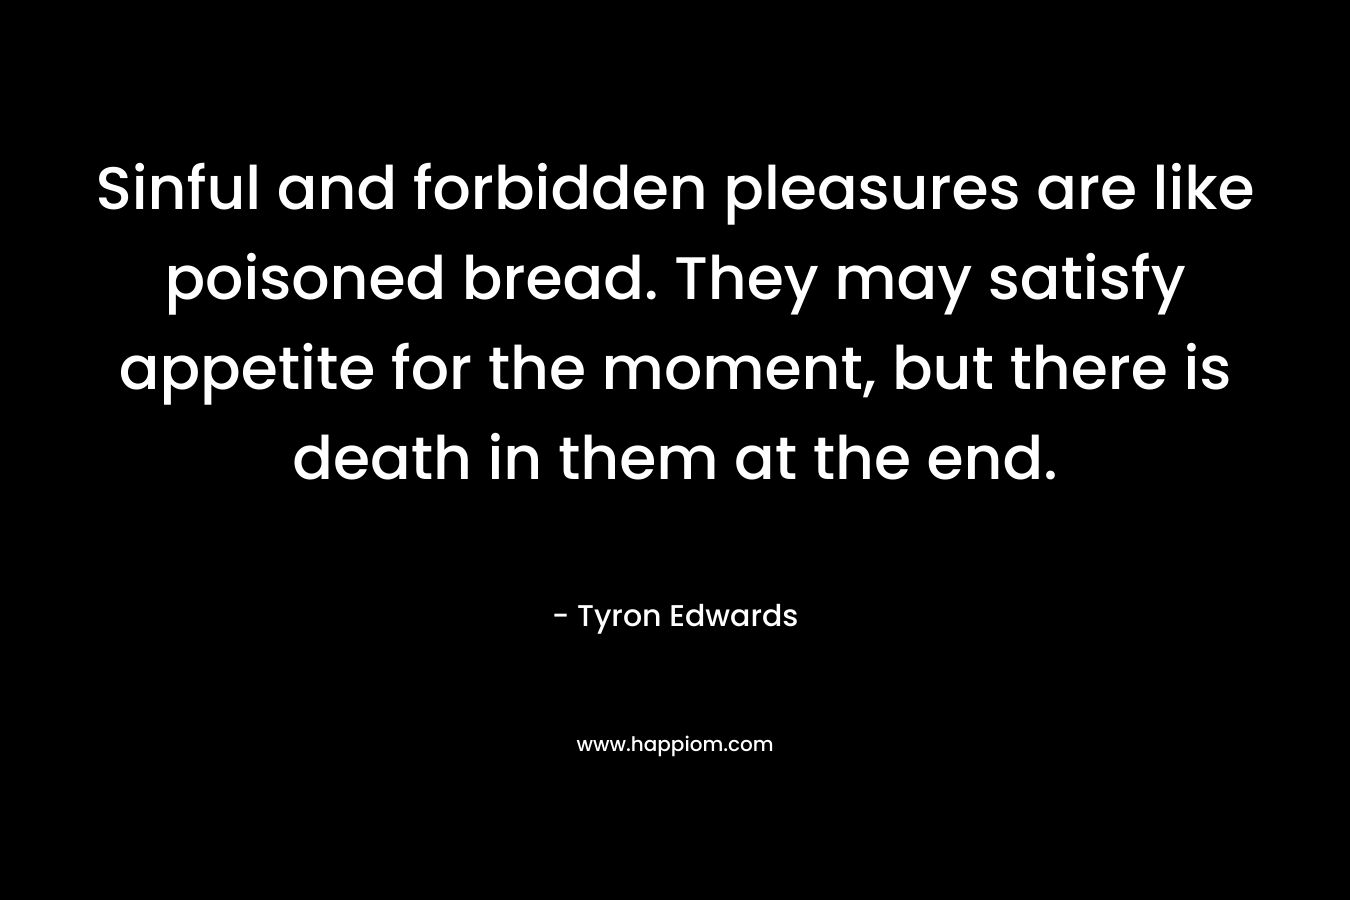 Sinful and forbidden pleasures are like poisoned bread. They may satisfy appetite for the moment, but there is death in them at the end.